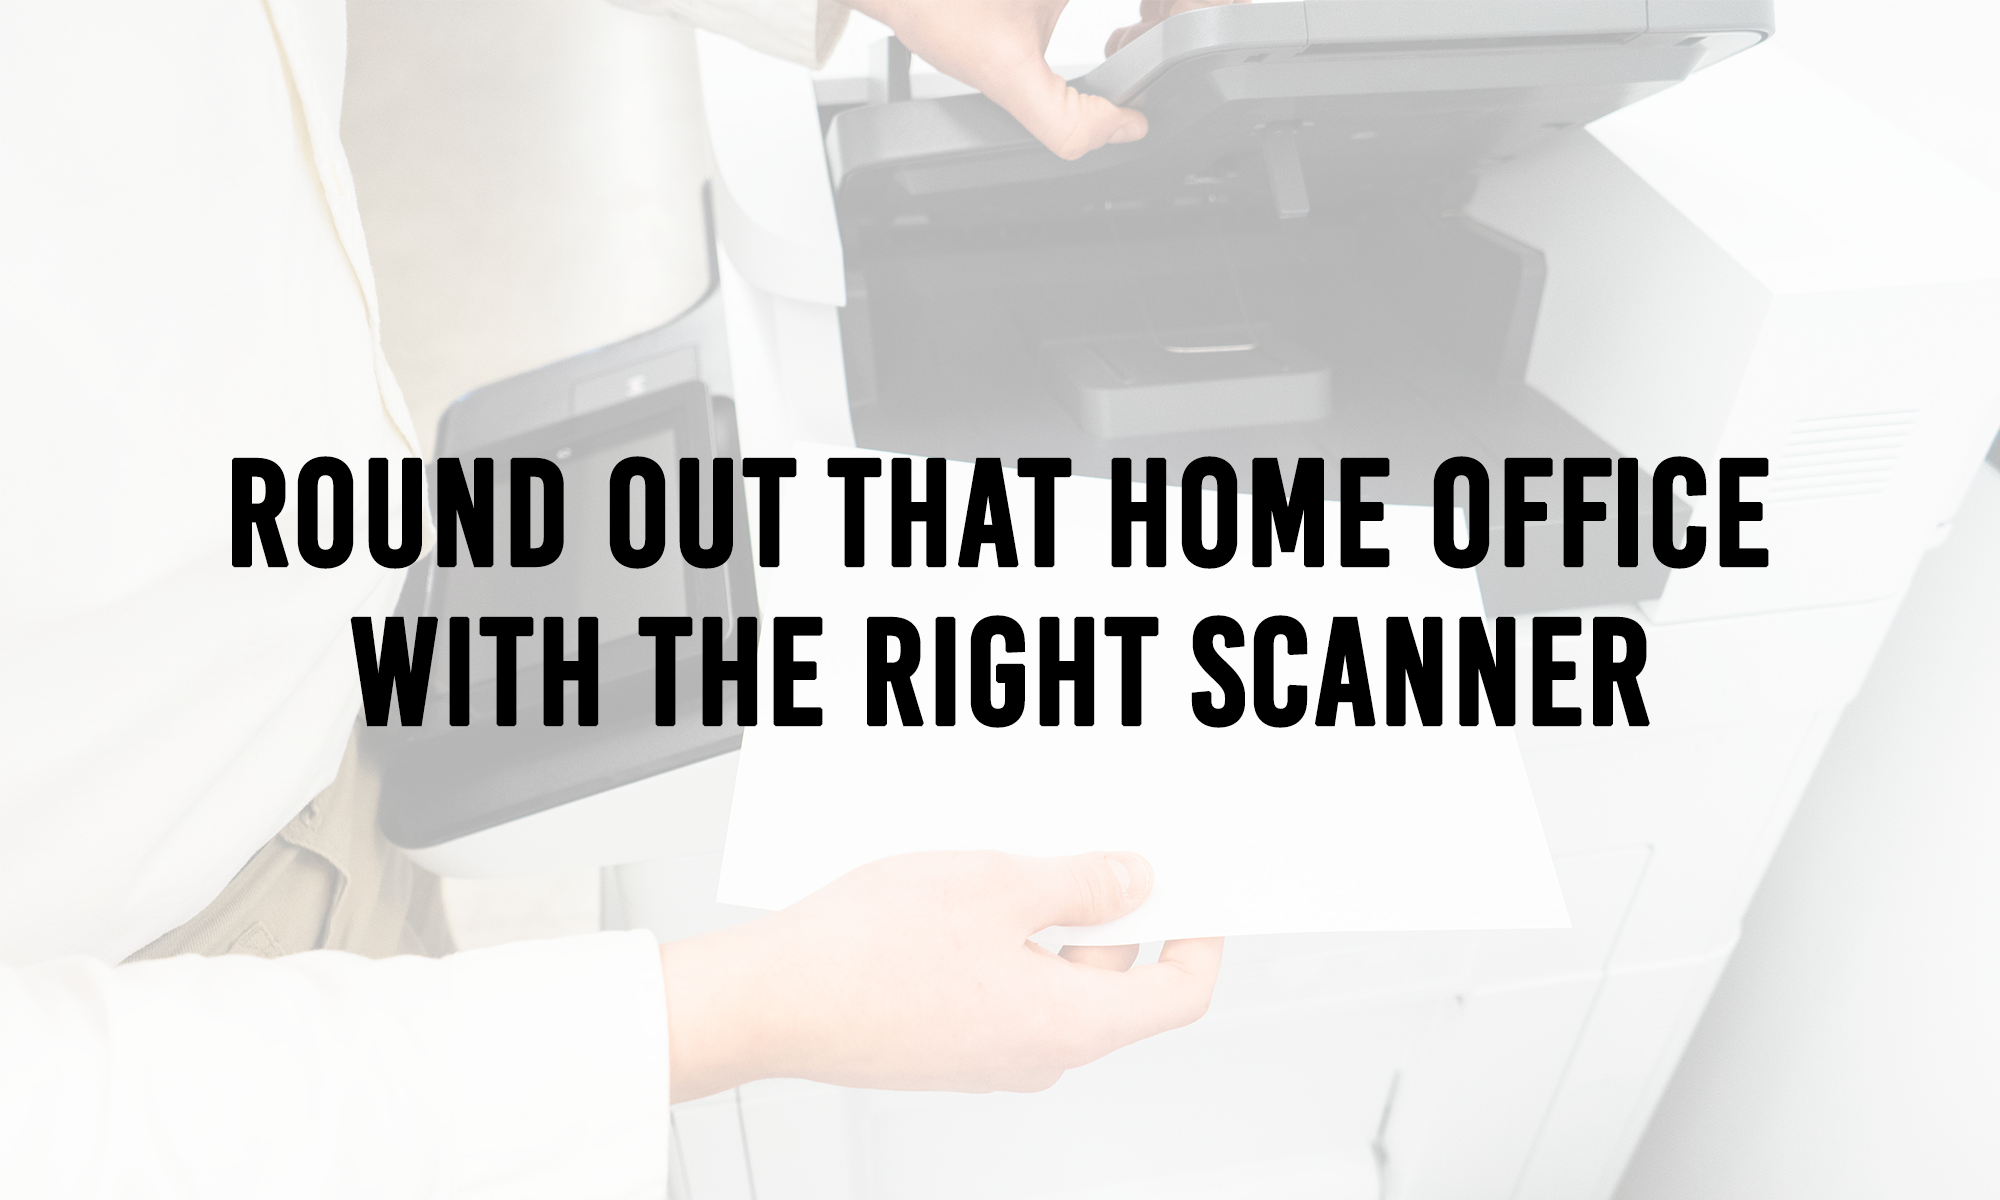 Round Out That Home Office with the Right Scanner